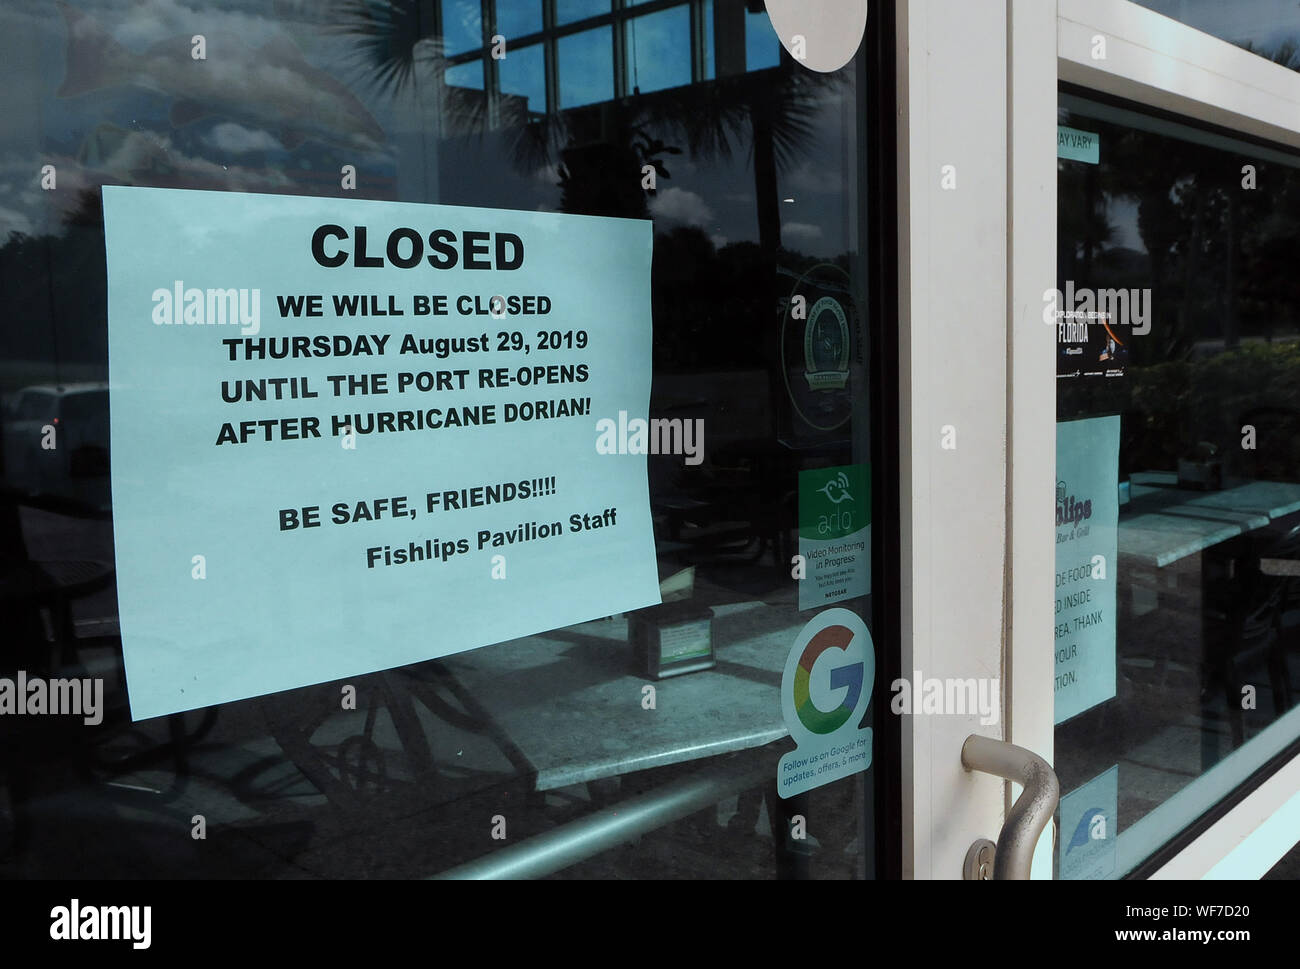 Port Canaveral, Florida, USA. 30th Aug, 2019. A notice is seen posted on the Fishlips Pavilion window at Jetty Park advising patrons that the restaurant will be closed due to Hurricane Dorian. The hurricane has intensified to Category 4 and will threaten parts of the Bahamas and the Southeastern U.S. over Labor Day weekend. Credit: Paul Hennessy/SOPA Images/ZUMA Wire/Alamy Live News Stock Photo